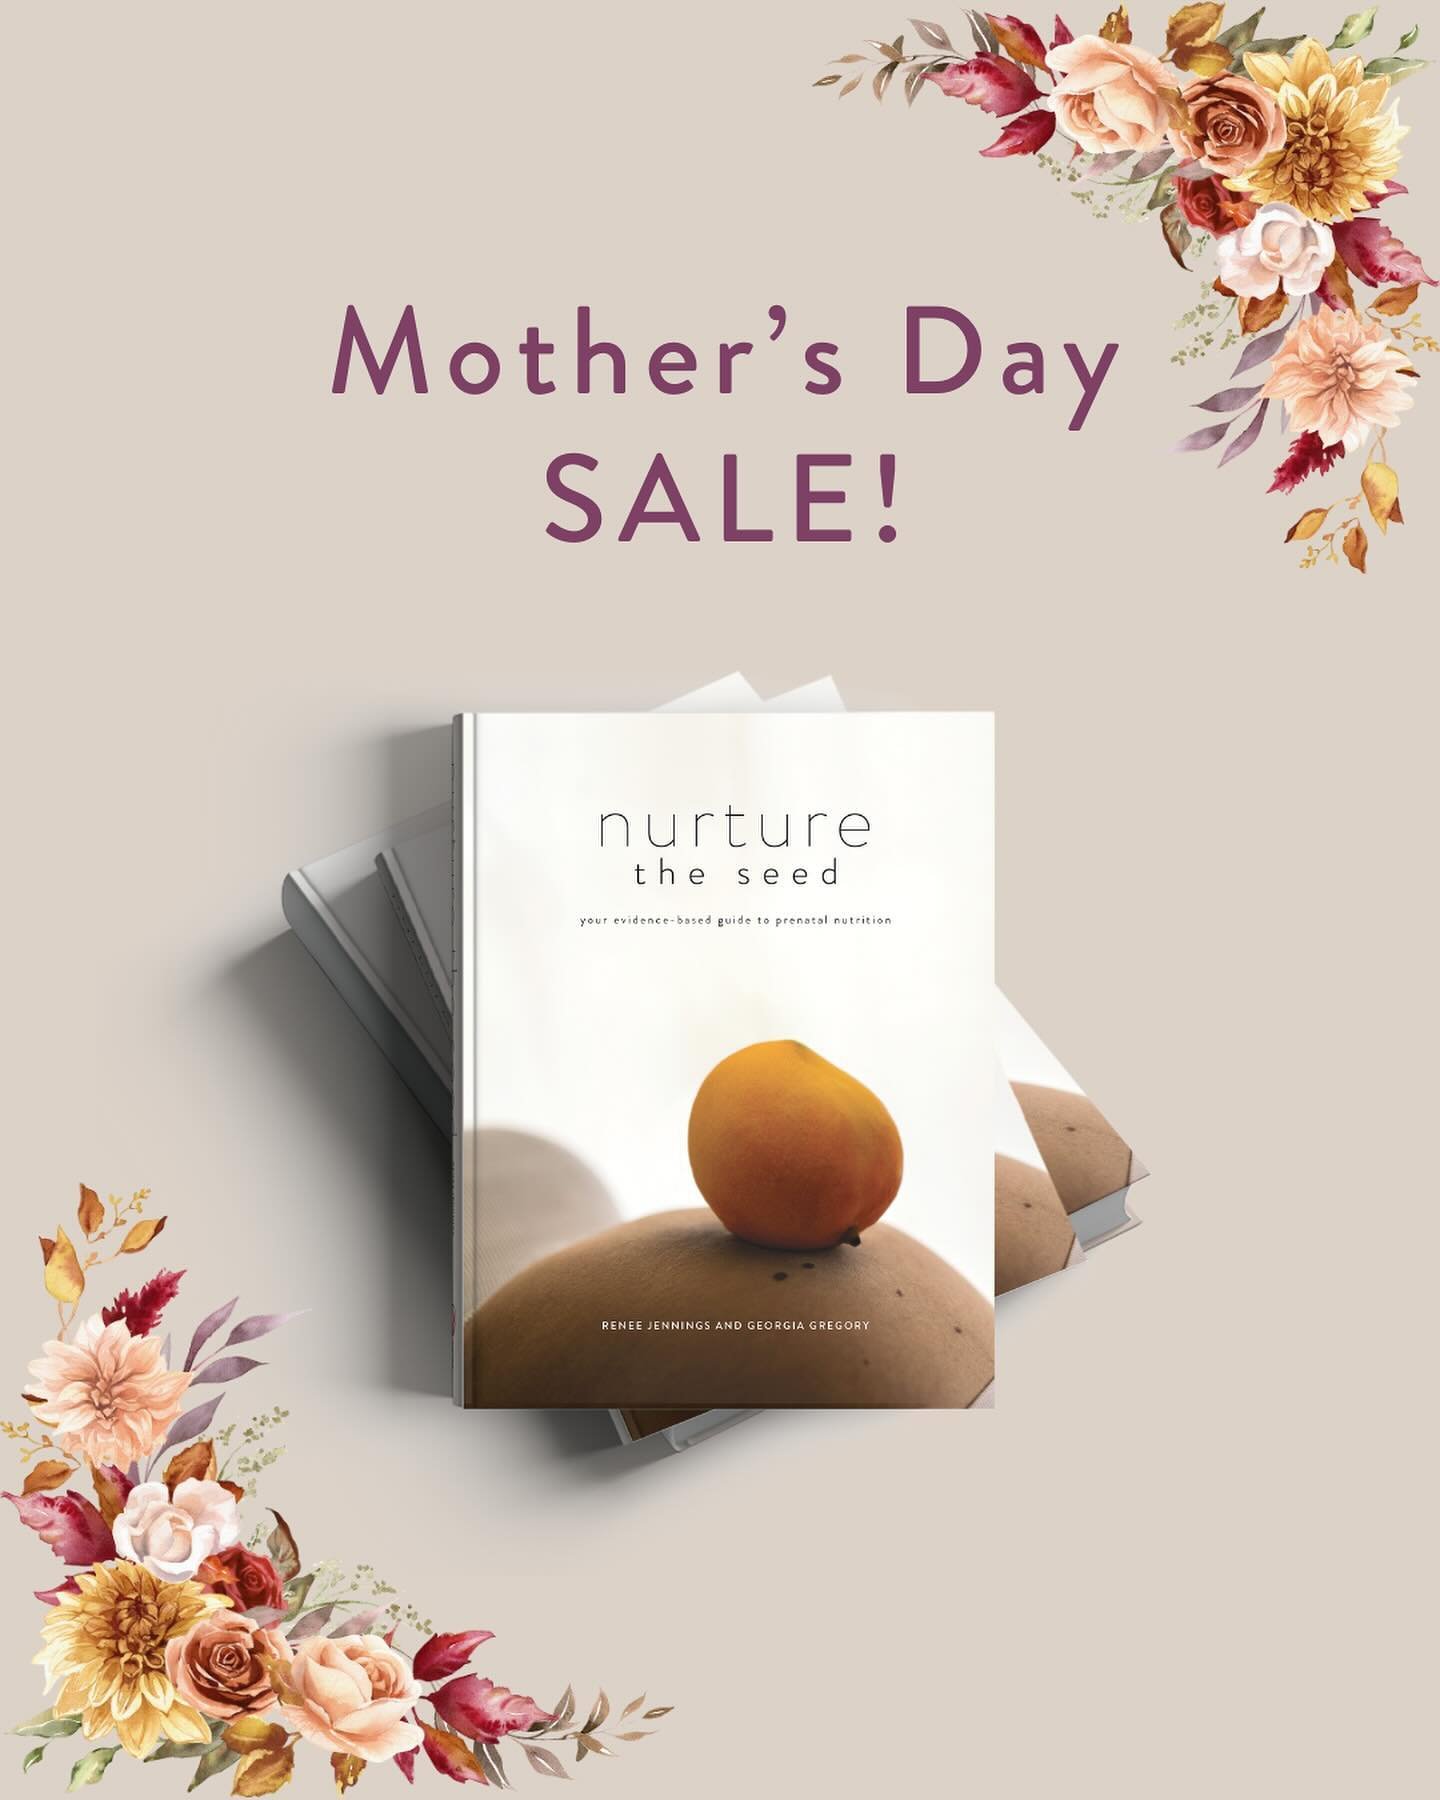 Mother&rsquo;s Day sale - 48 hours only!
To thank you for being part of my community, I want to treat you all this Mother&rsquo;s Day by giving you 10% off my book, Nurture the Seed.

Nurture the Seed is the ultimate nutrition guide for expecting mum